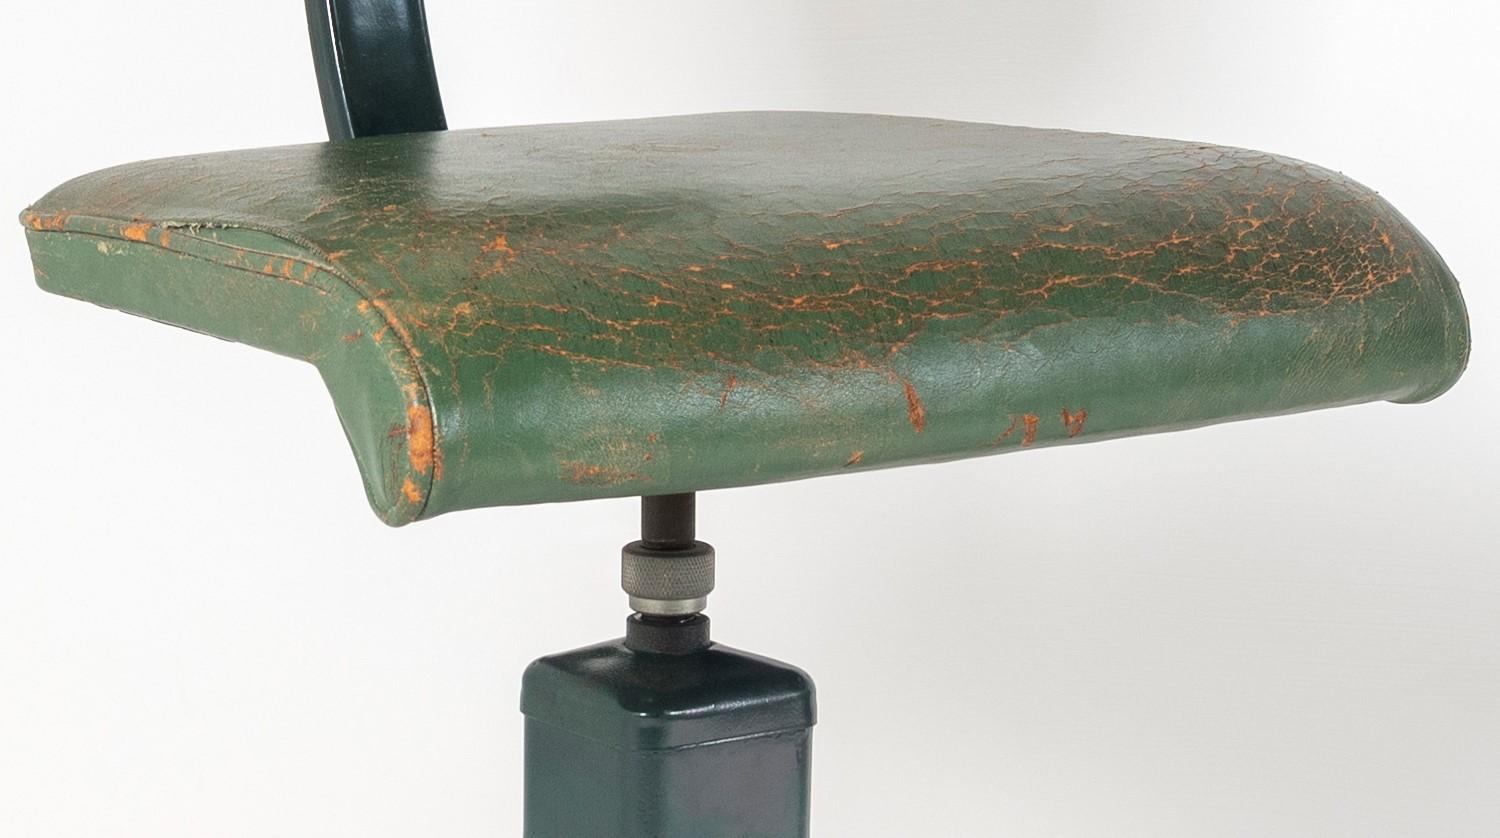 A rare and highly unusual splayed factory stool from the 1950s, by Evertaut. Likely made as a special factory piece or exhibition piece.
In excellent original condition, with lovely wear and patina to the seat, there is a small area of stitching